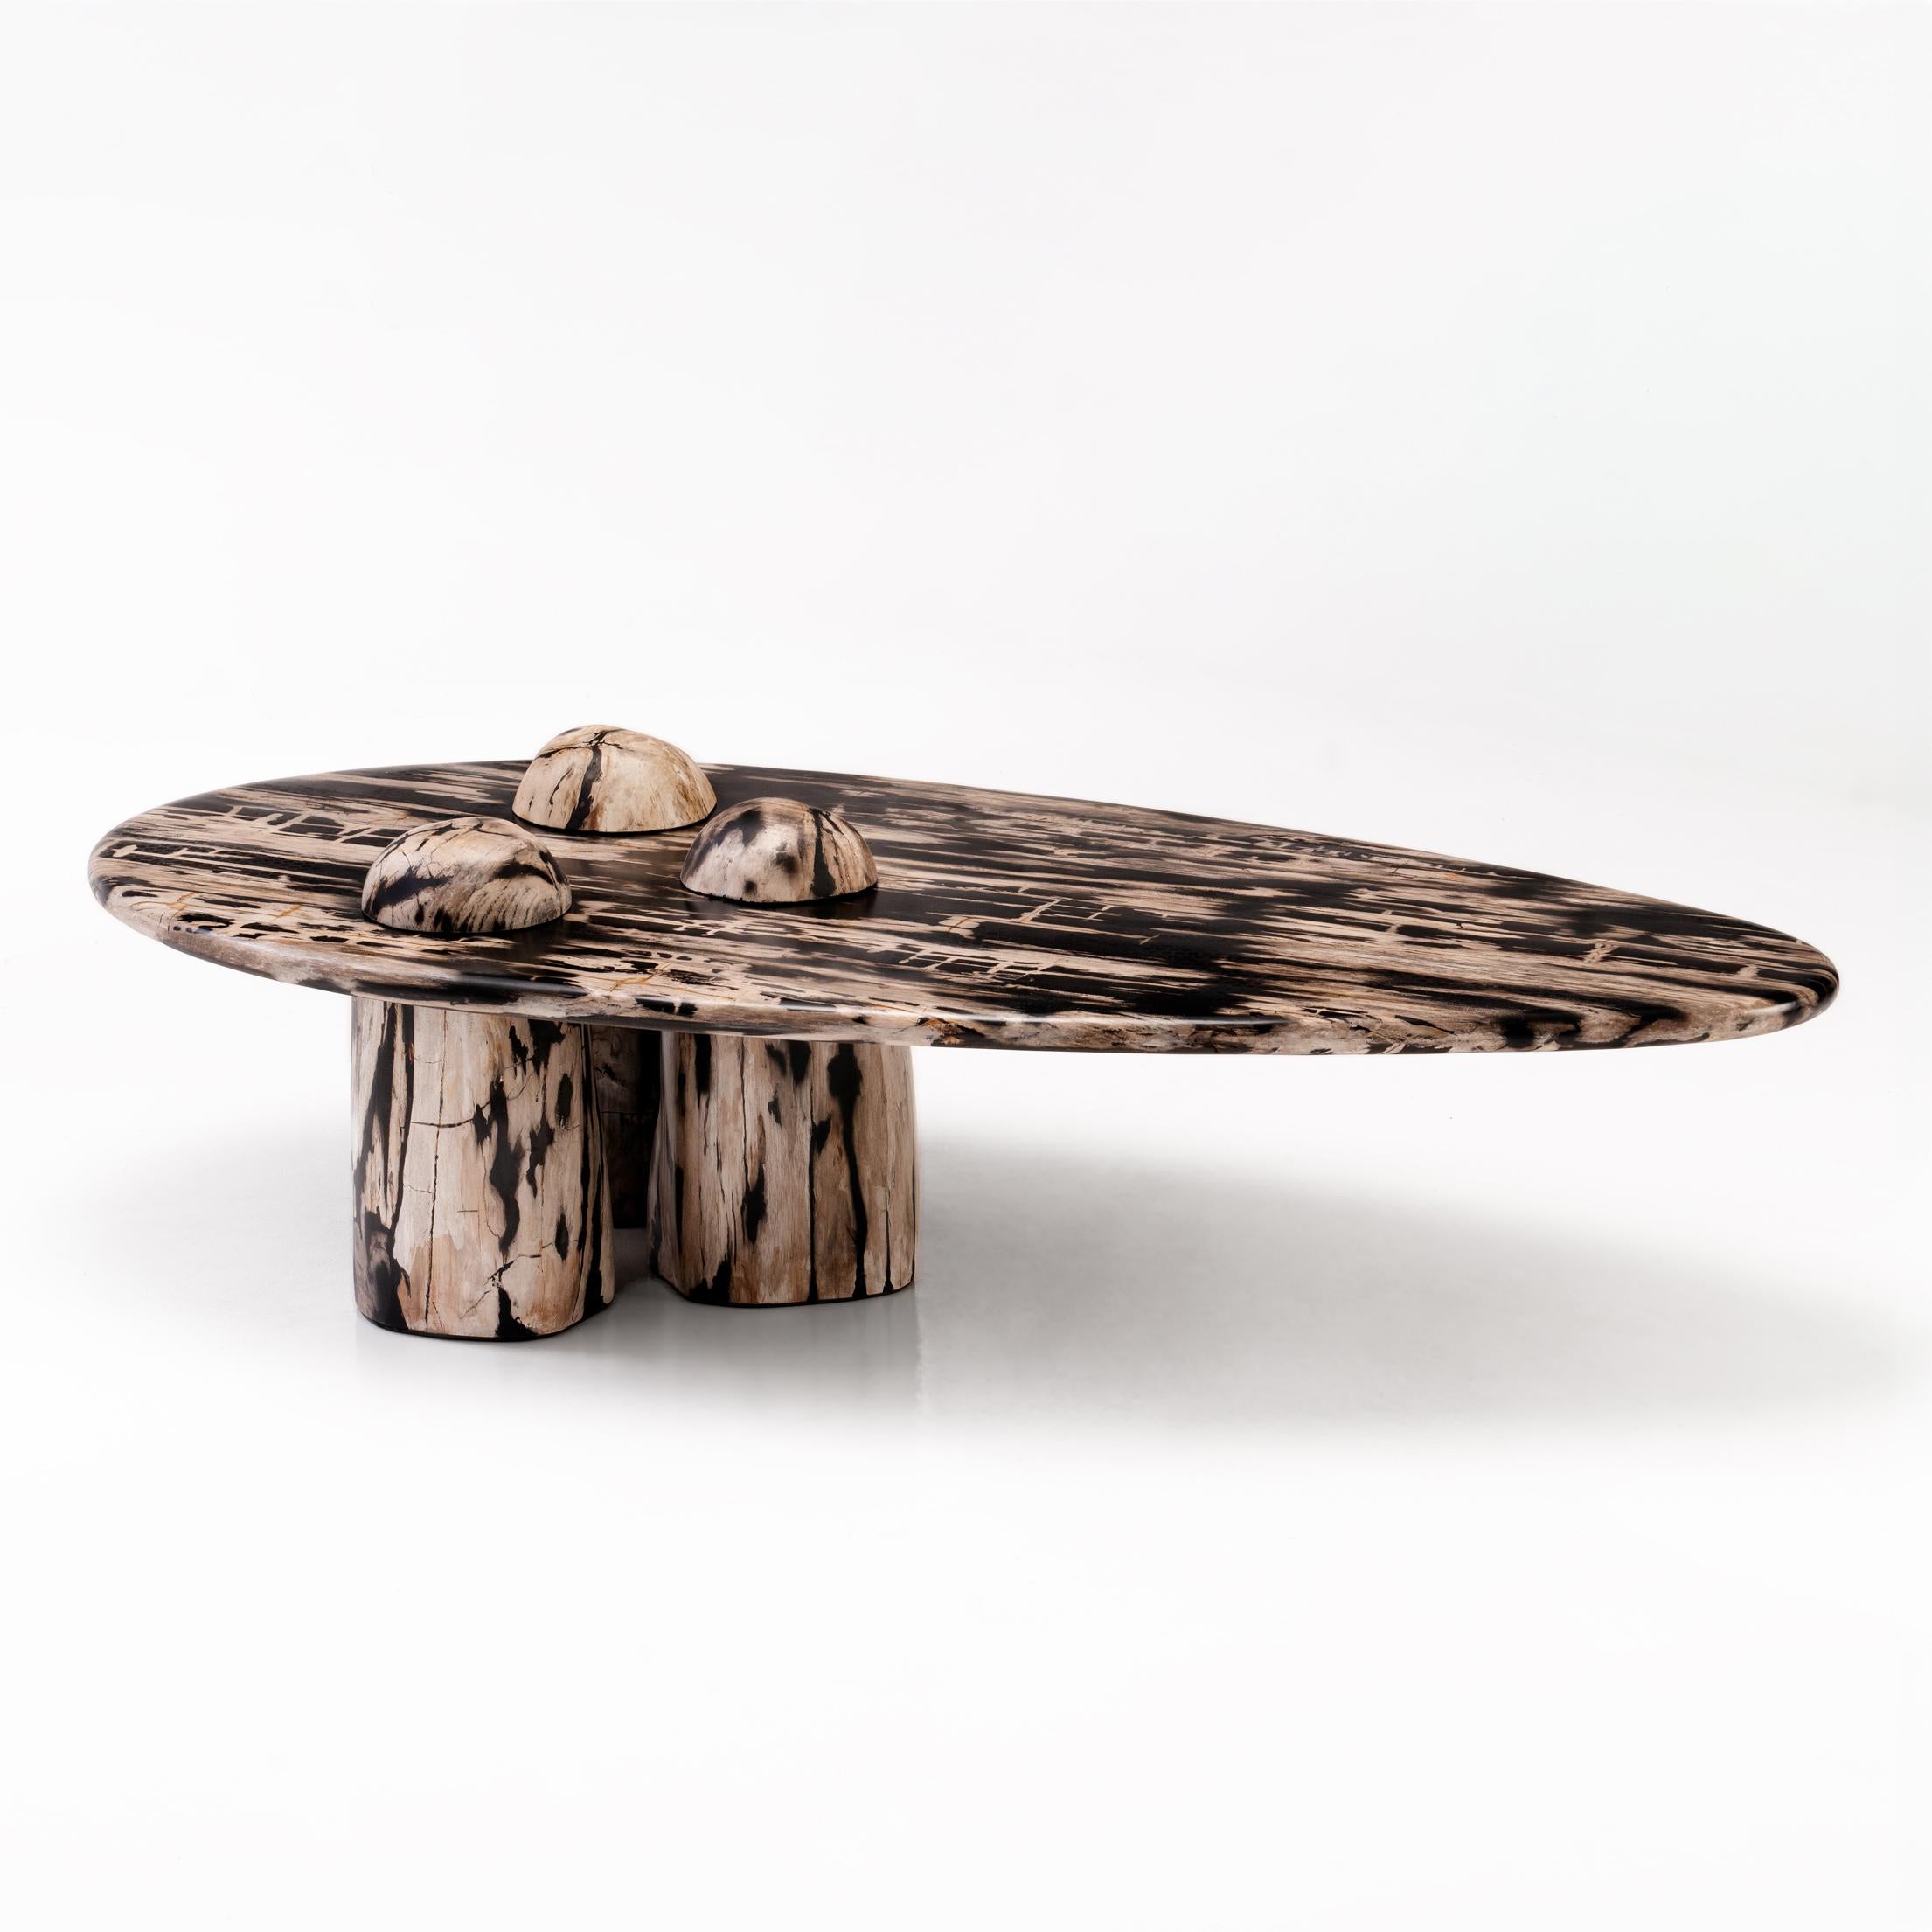 Everyone loves a good montage. Our ‘Rocky Montage’ coffee table pays homage to the world of organic stone sculptures and their symbolic nature. This piece features organic shapes and a cantilevered formation, hand sculpted from rare petrified wood